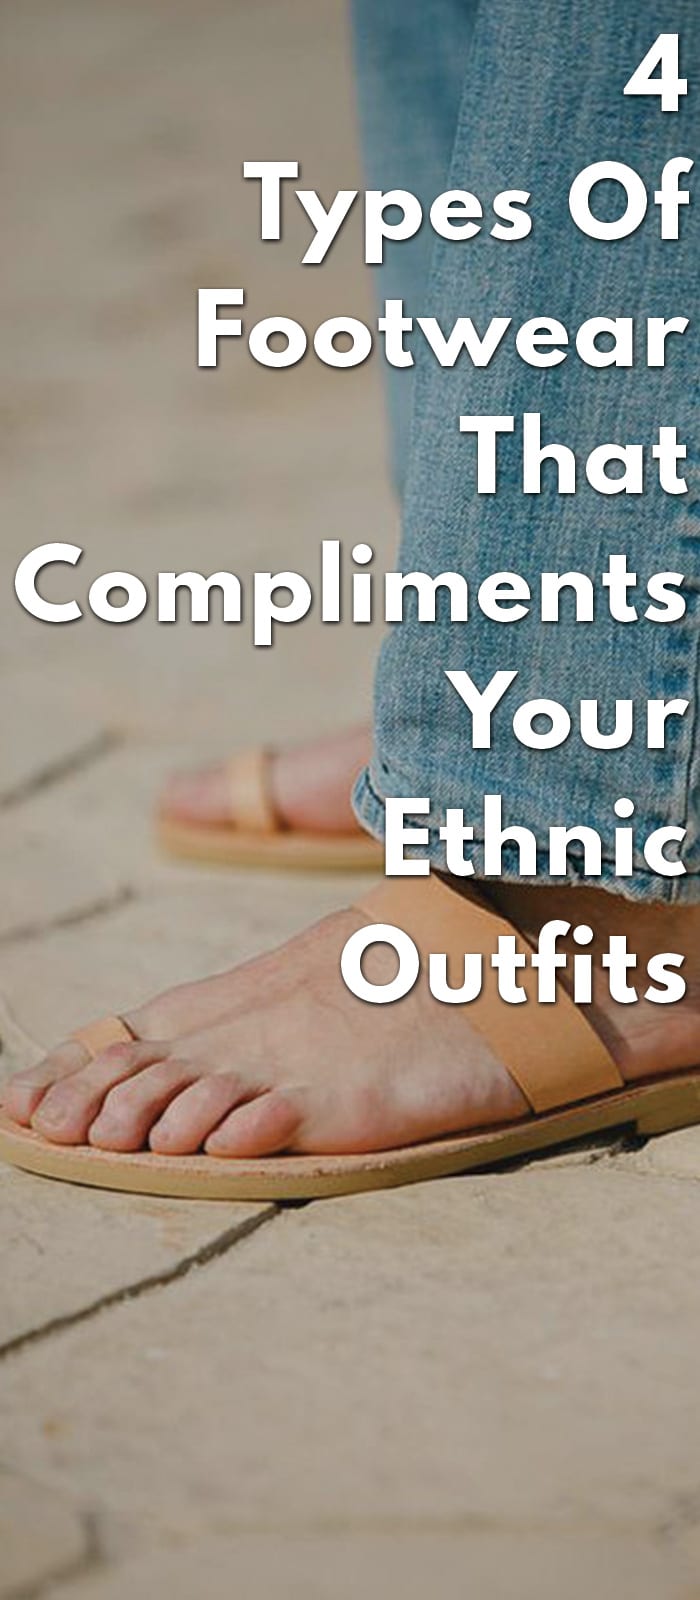 4-Types-Of-Footwear-That-Compliments-Your-Ethnic-Outfits